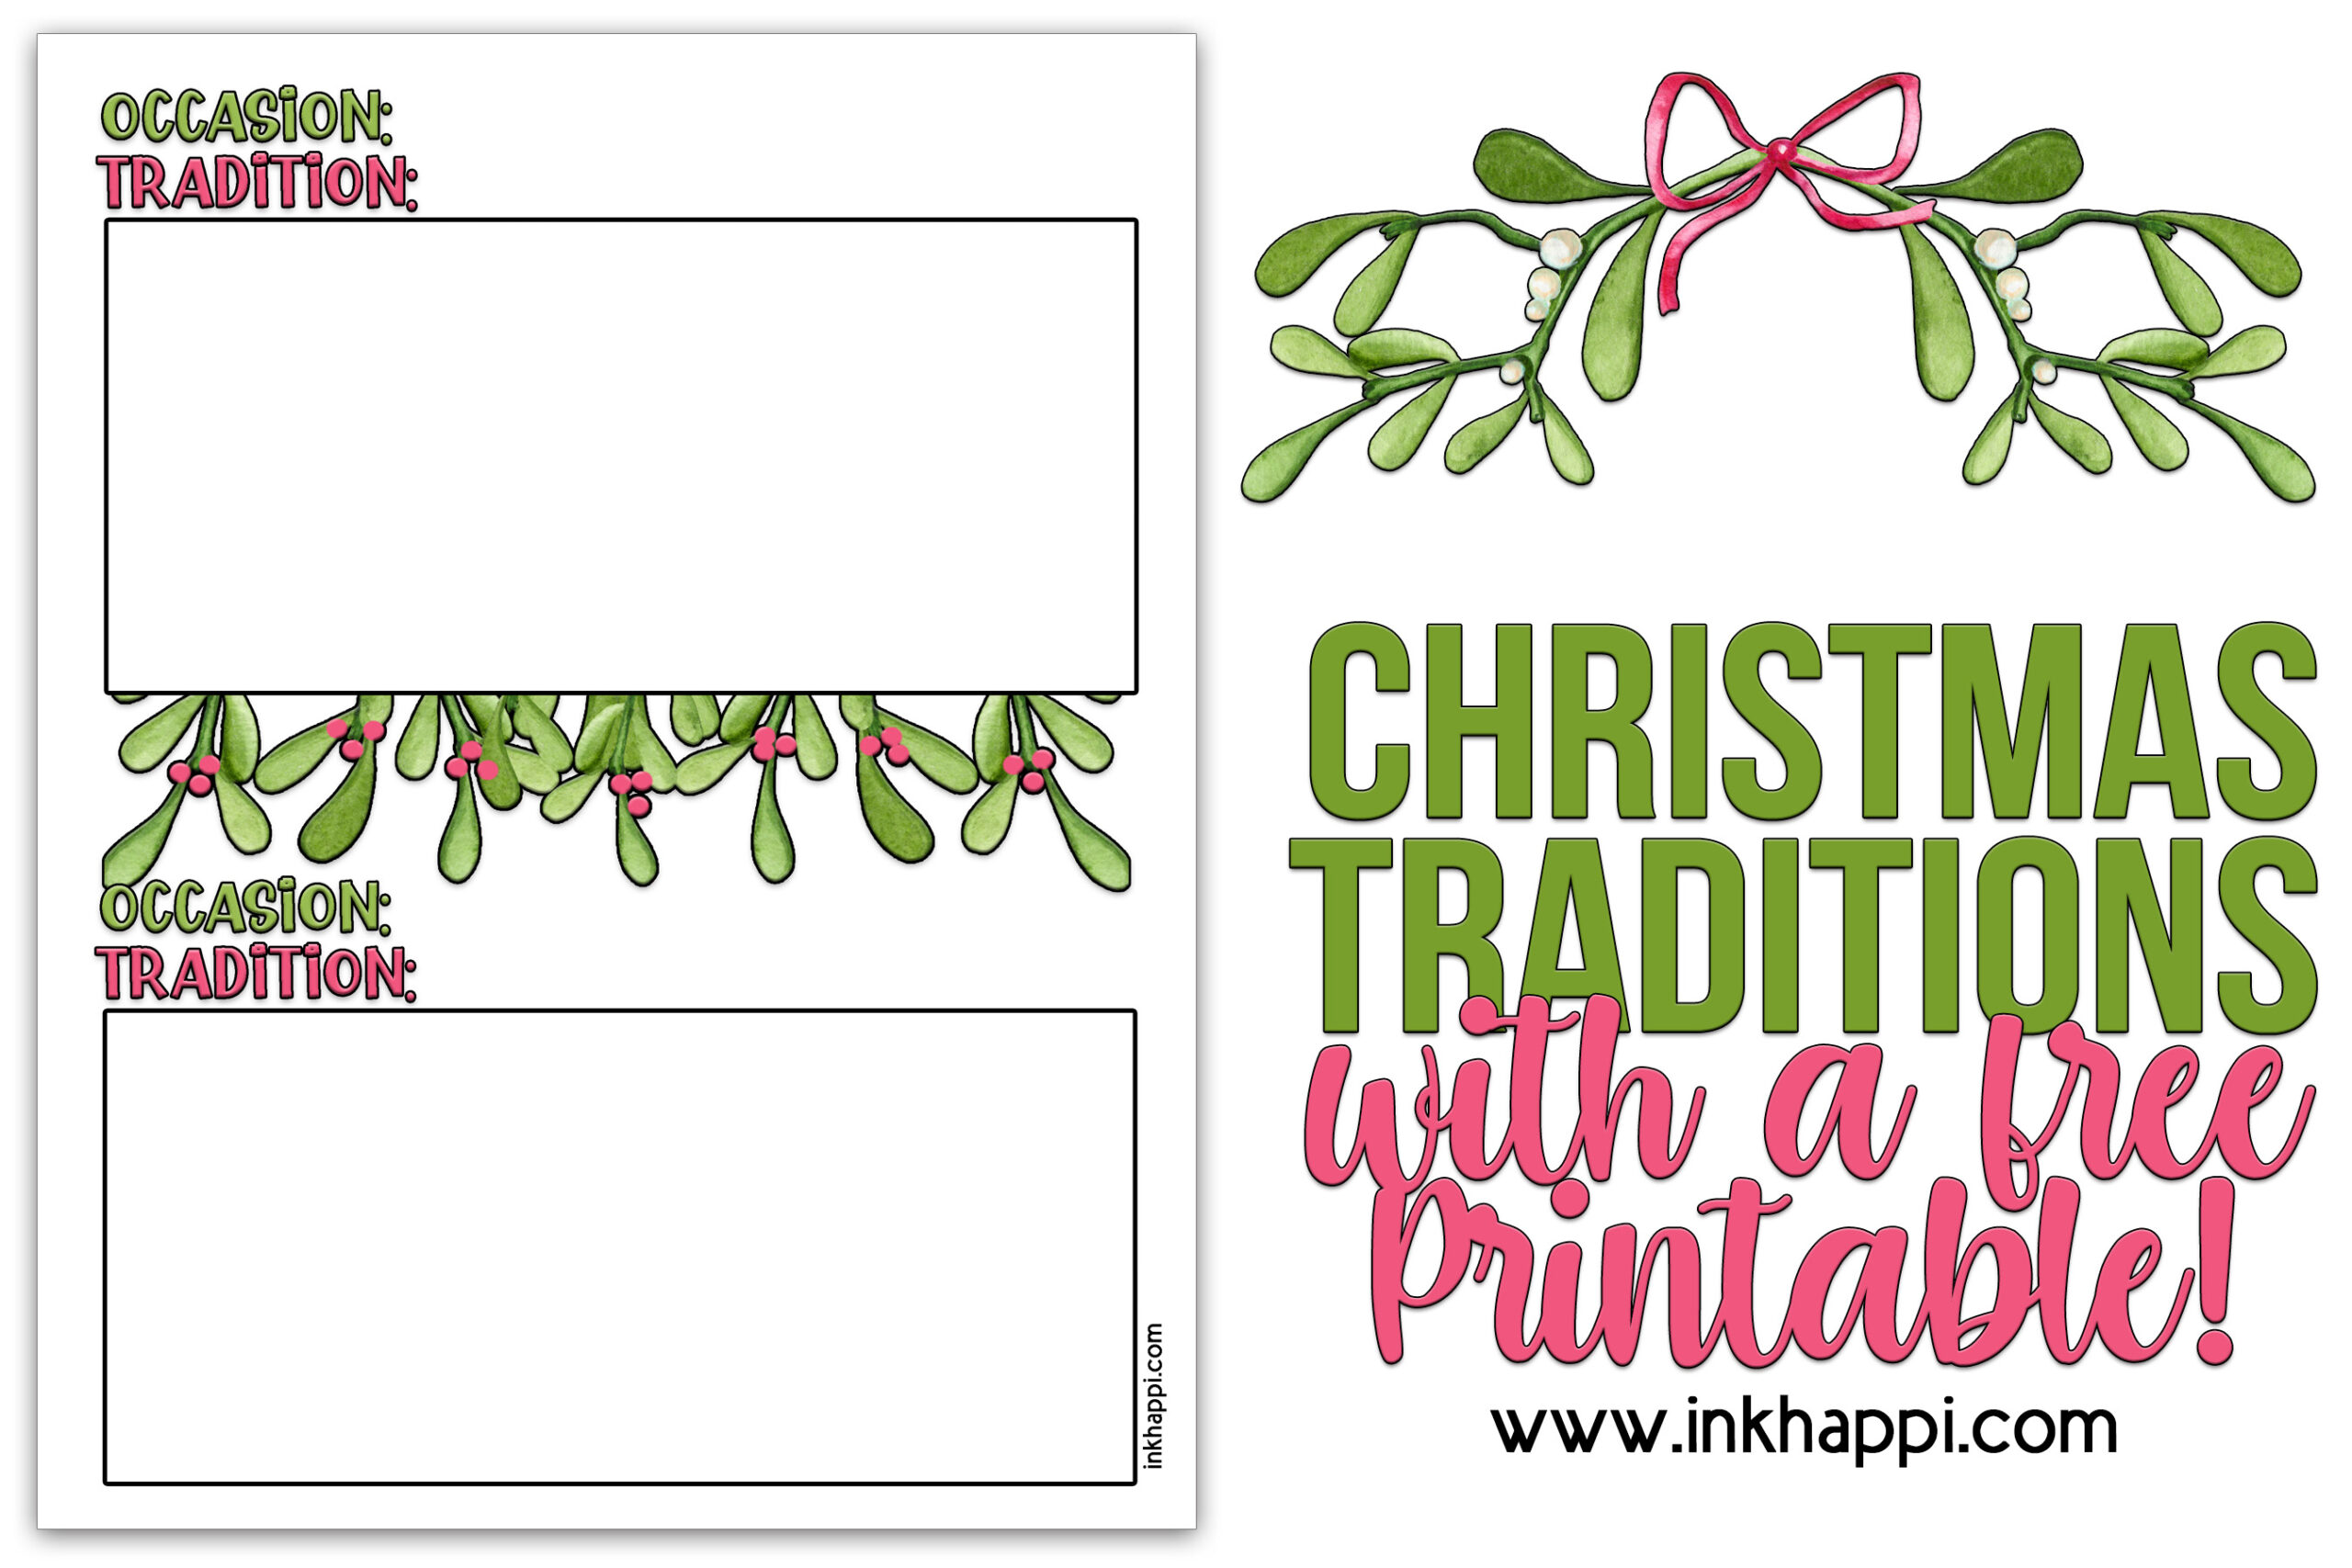 Plan and keep traditions alive with this t radition planner tracking page. #free printable #christmastraditions